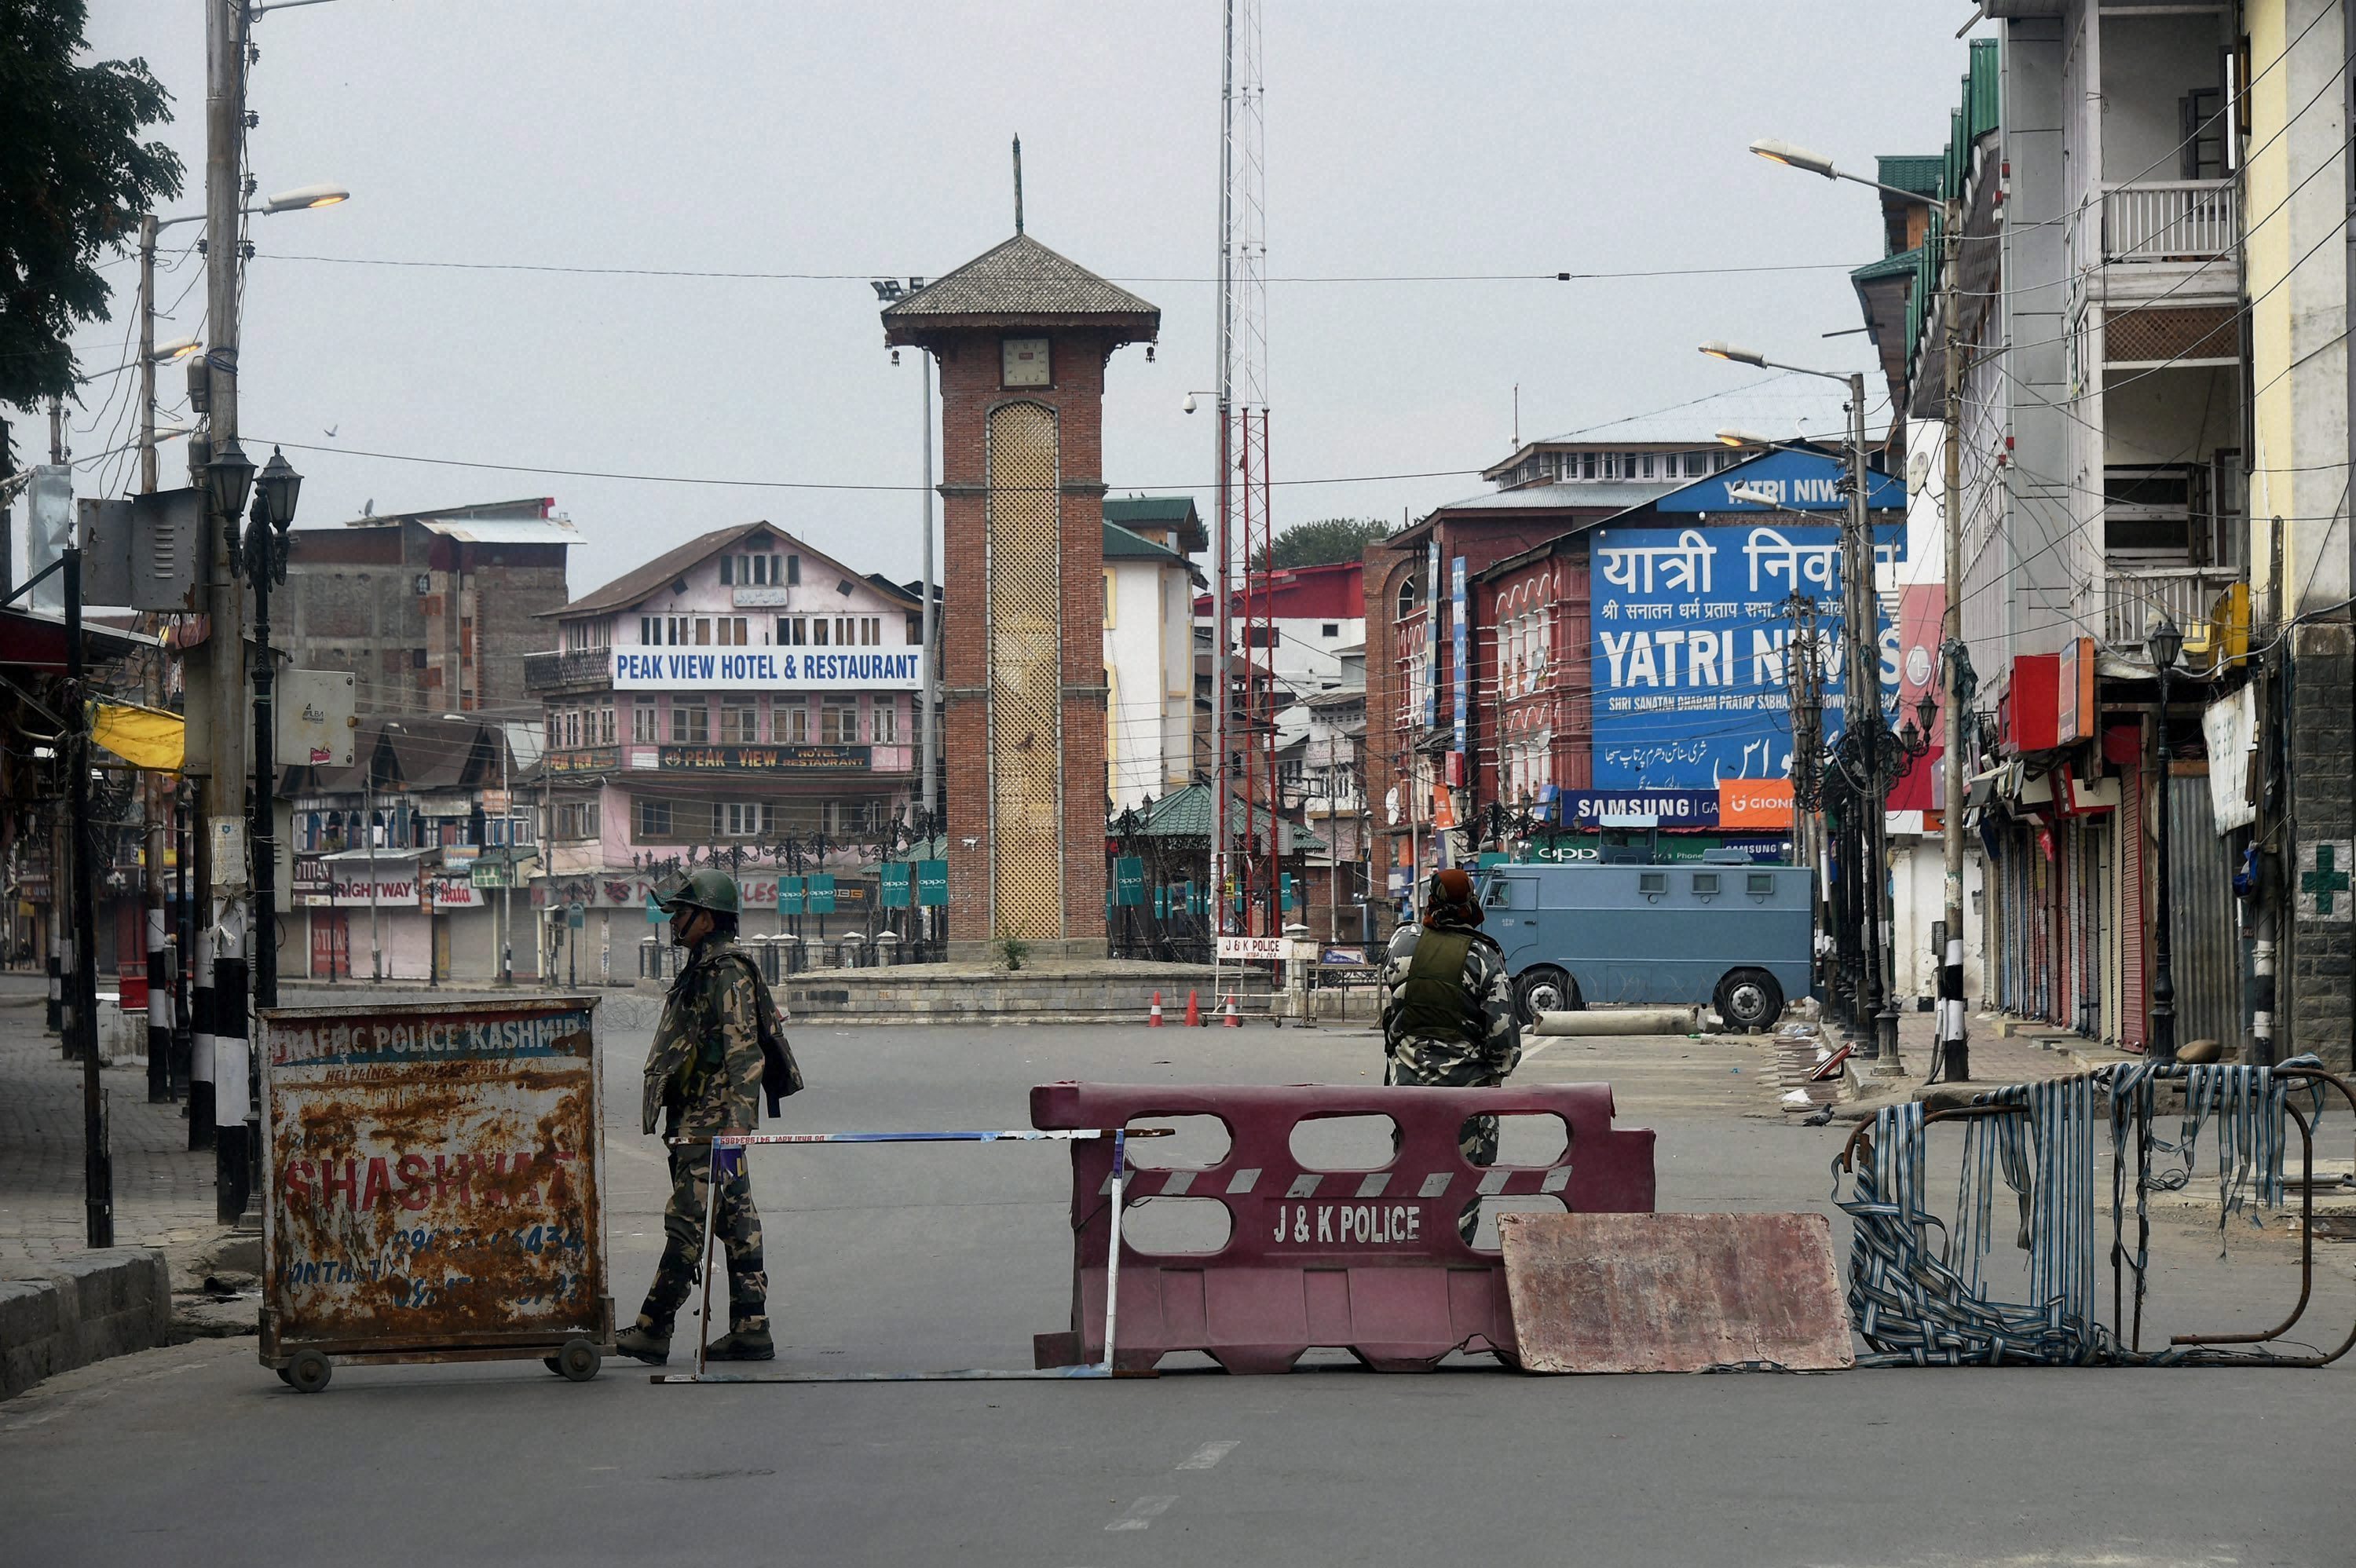 Srinagar: Security personnel guarding at Lal Chowk during curfew in Srinagar on Tuesday. PTI Photo by S Irfan (PTI9_13_2016_000101B)